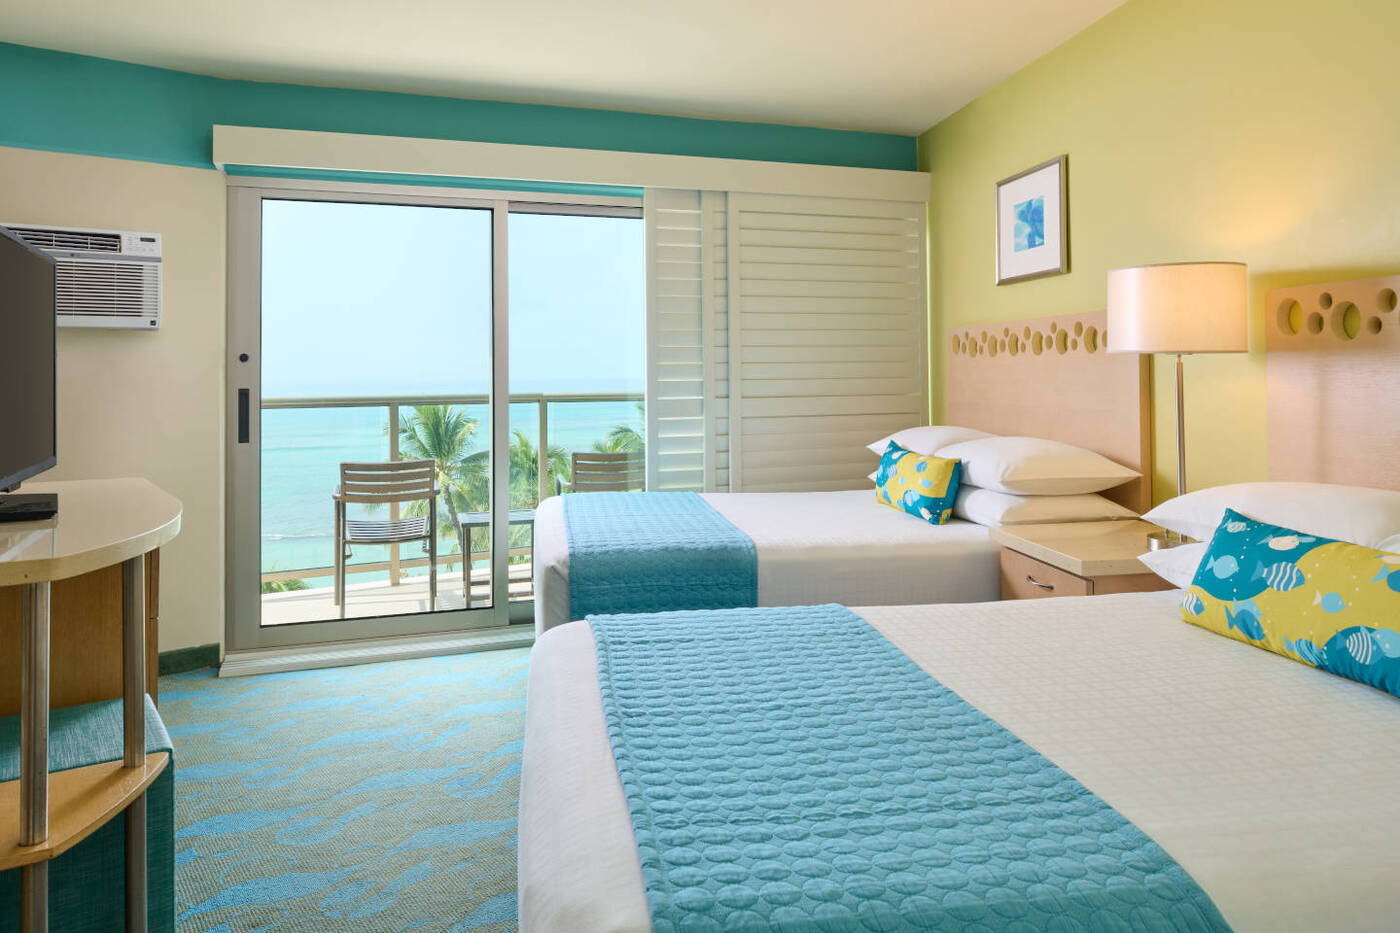 Oceanfront Room with Double Bed Accommodations and Plantation Shutters